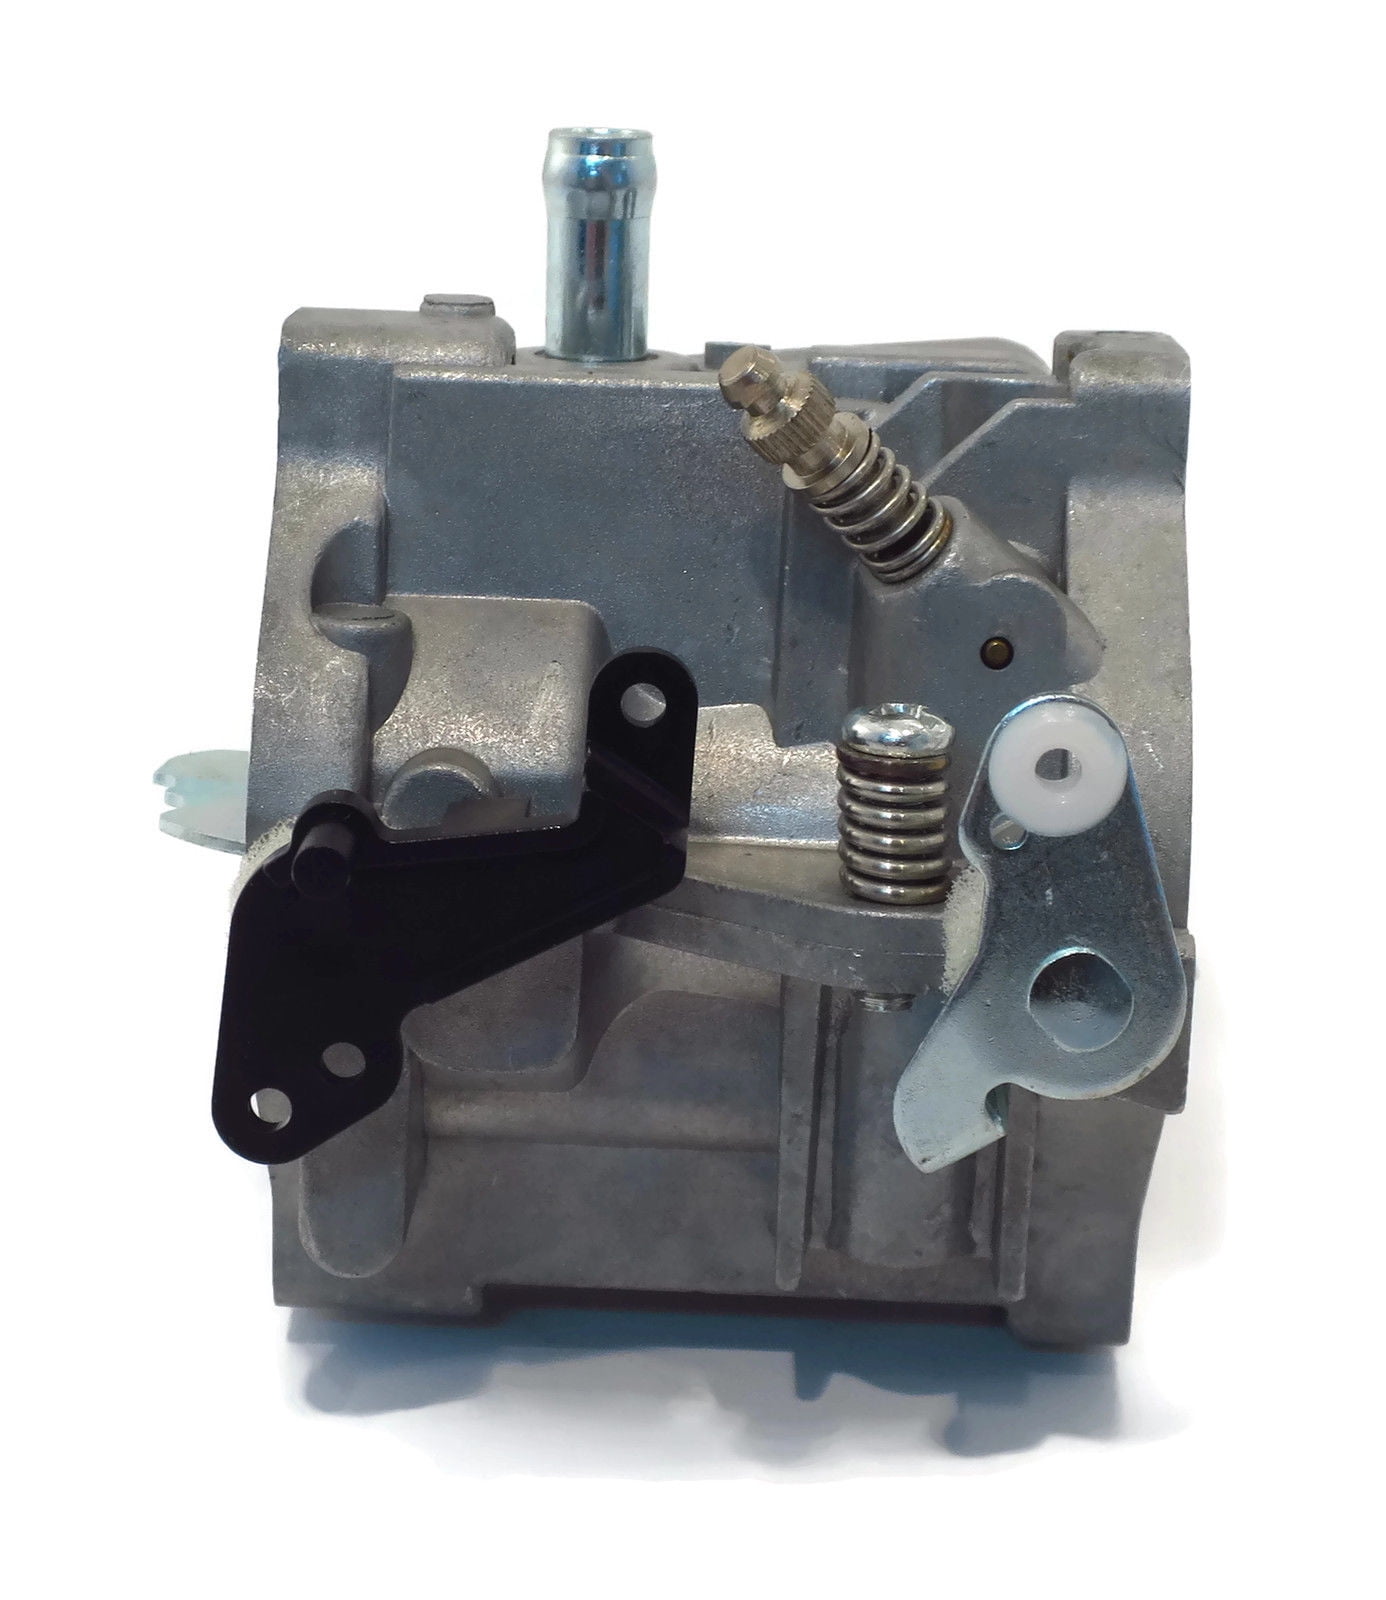 Details about   Carburetor Carb For Briggs & Stratton 31A507 31A607 31A707 31A777 31B707 Motor 